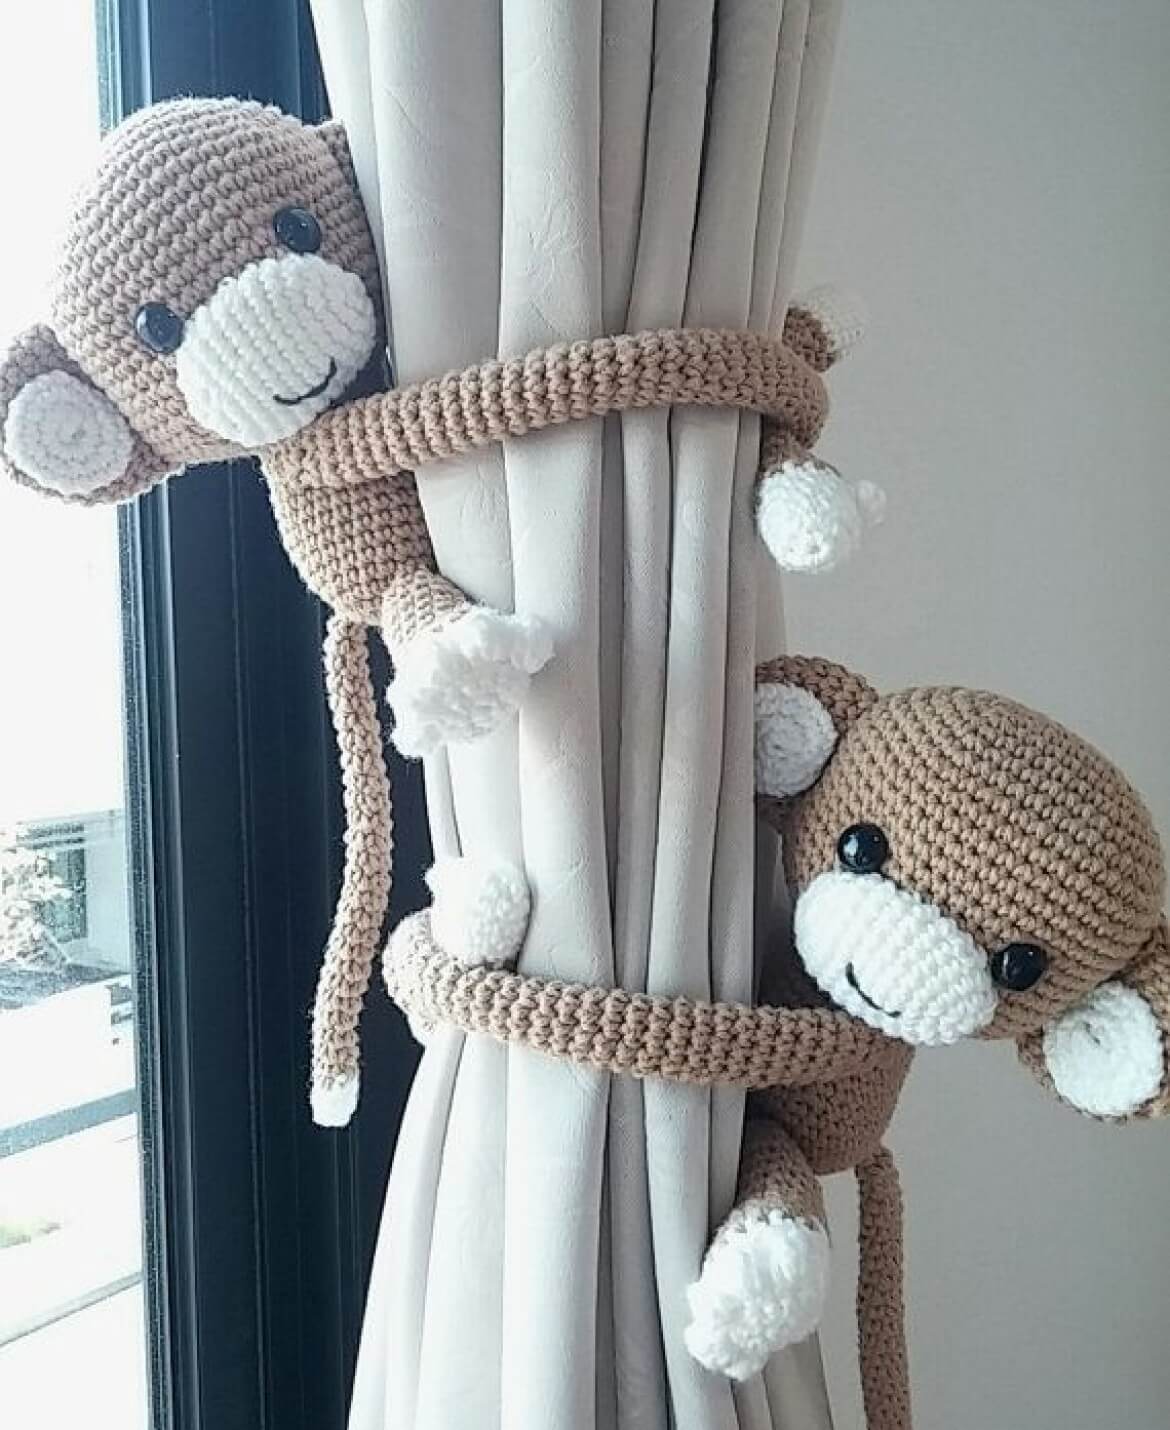 Crocheted Monkeys are a Sweet Touch